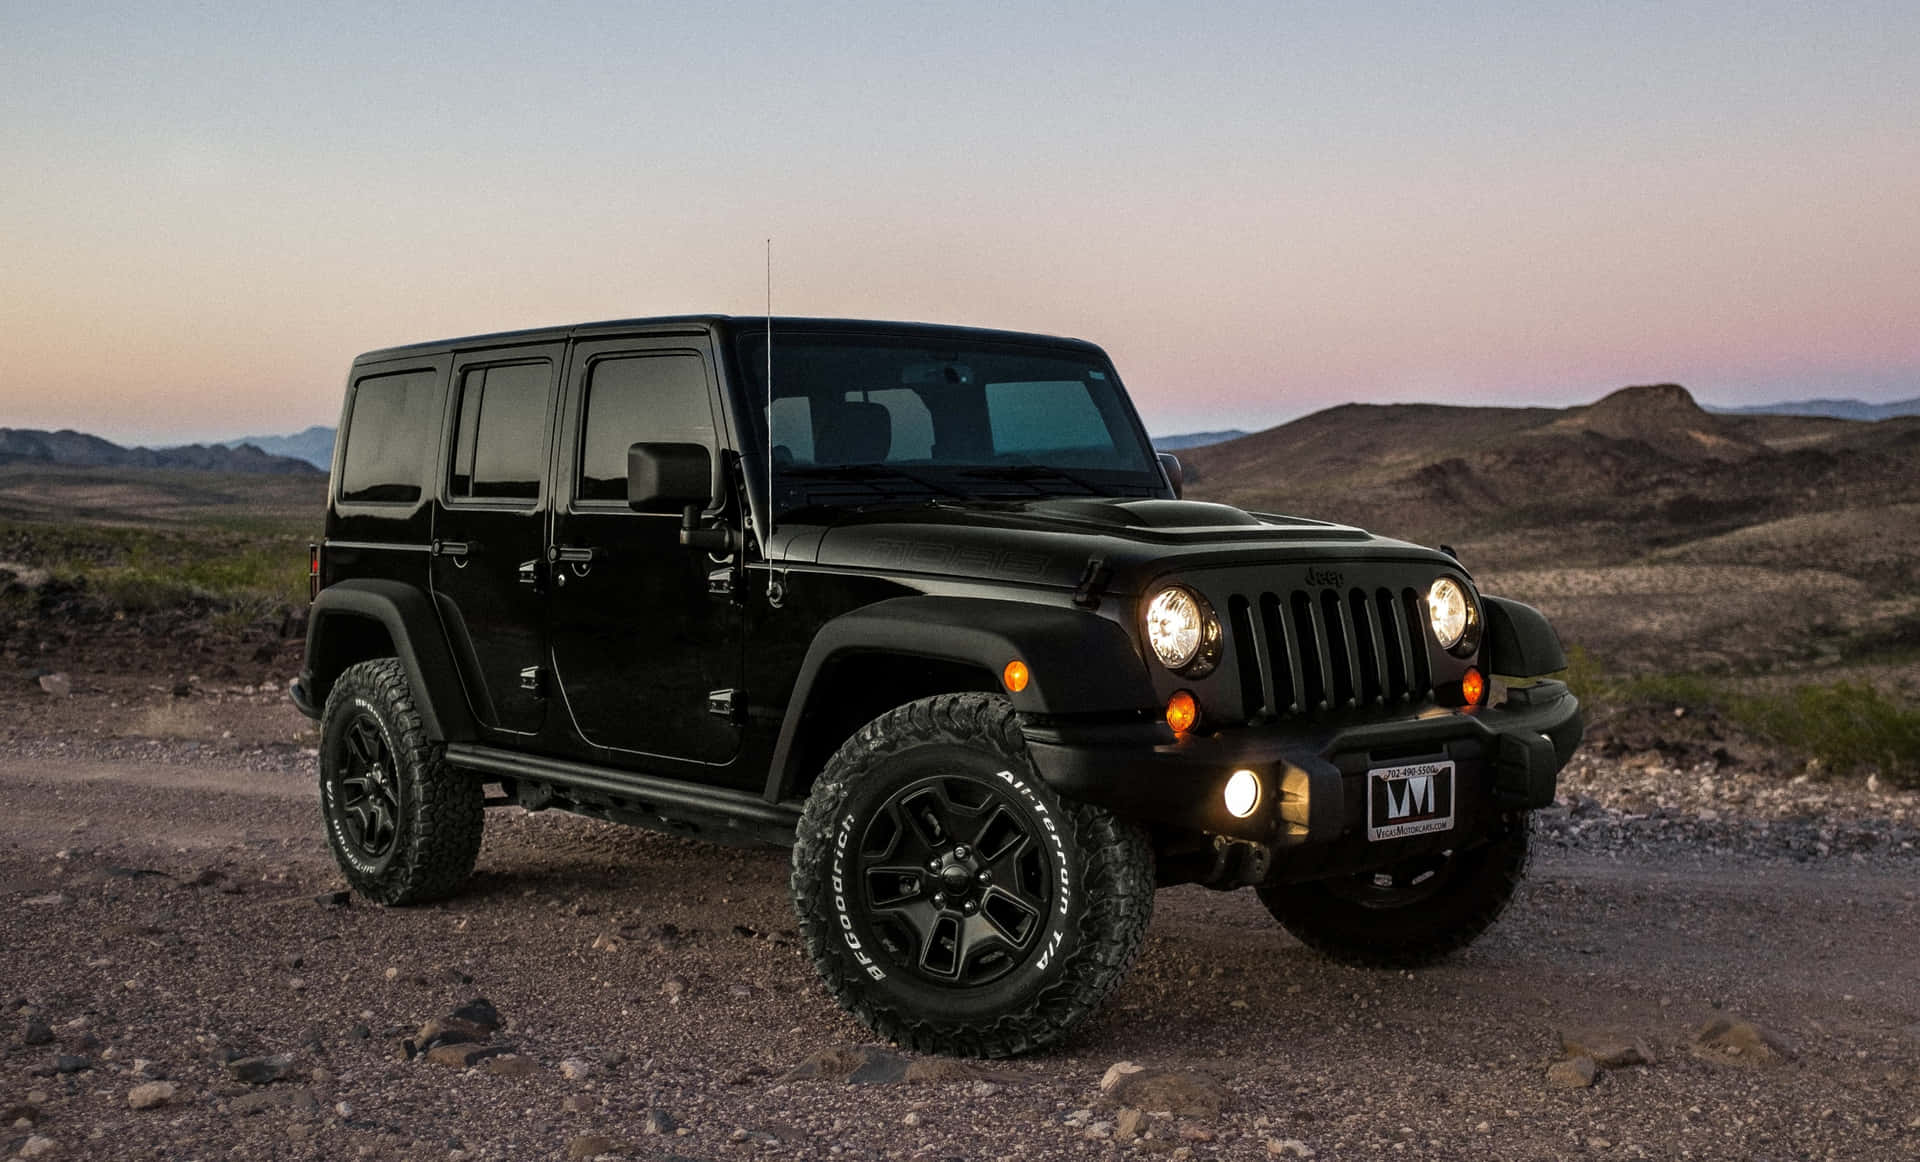 "Go Bold With a Dramatic Black Jeep"